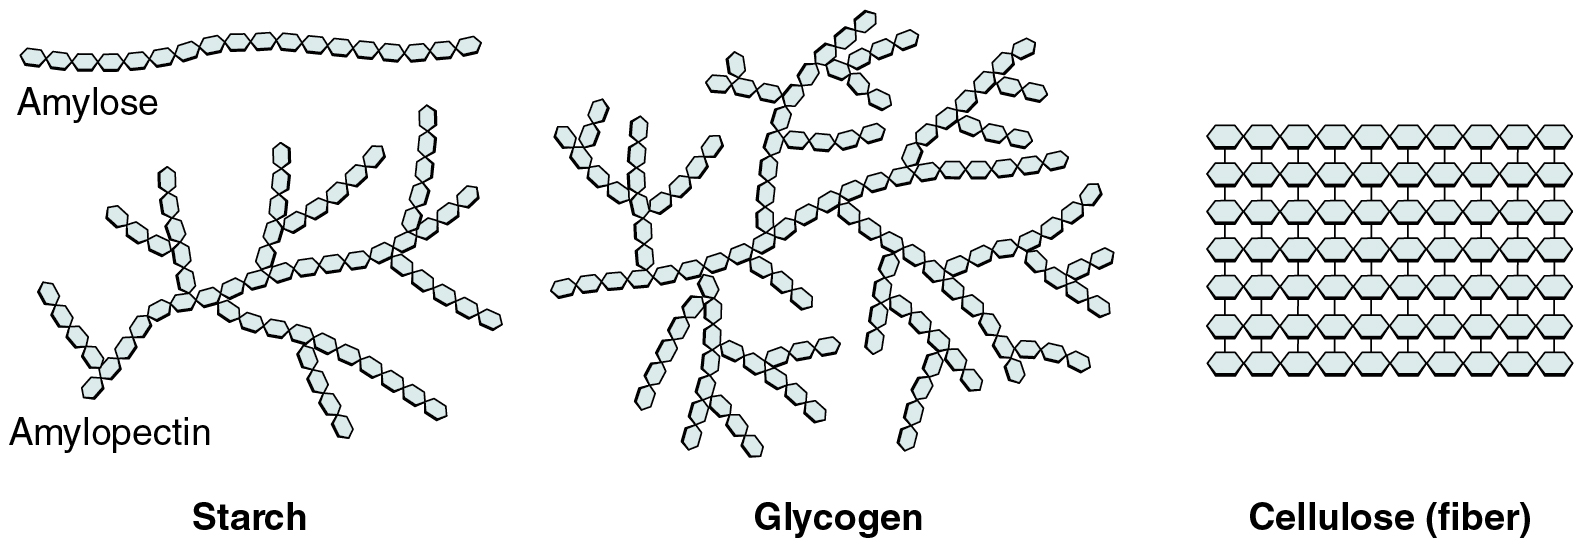 This figure shows the structure of starch, glycogen, and cellulose.